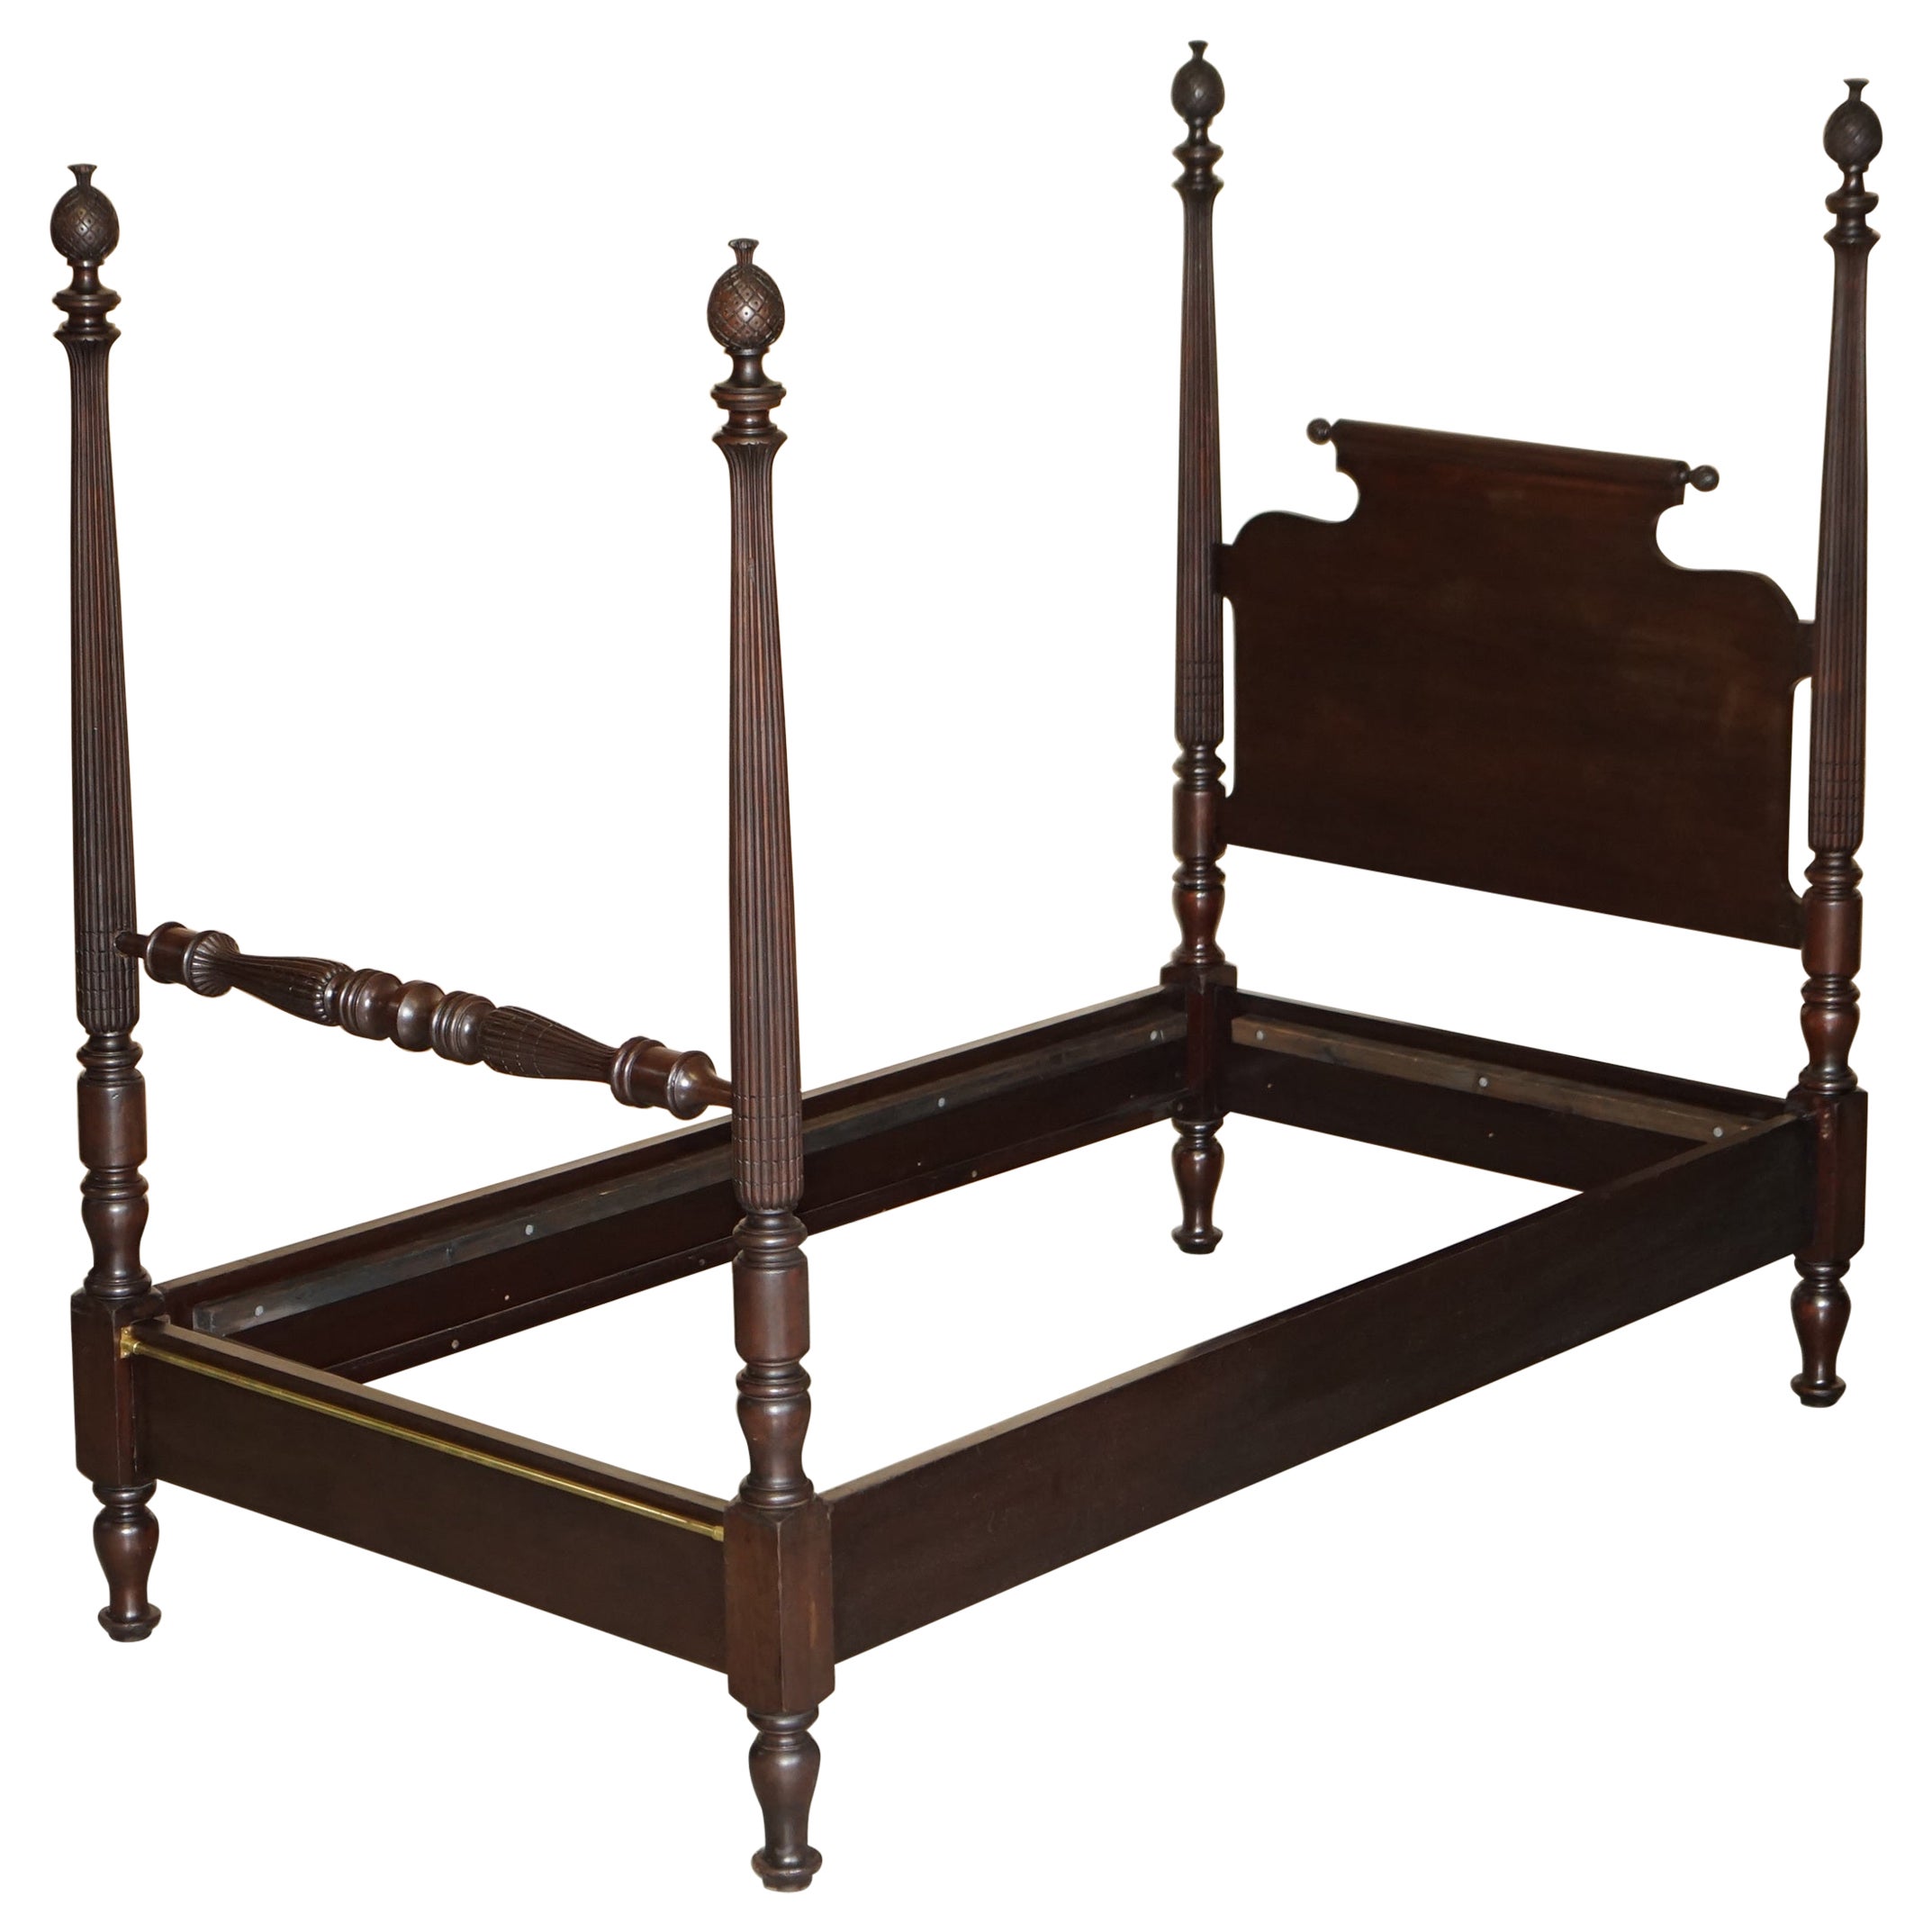 Circa 1800 American Federal Hardwood Four Poster Bed Frame with Carved Pillars For Sale